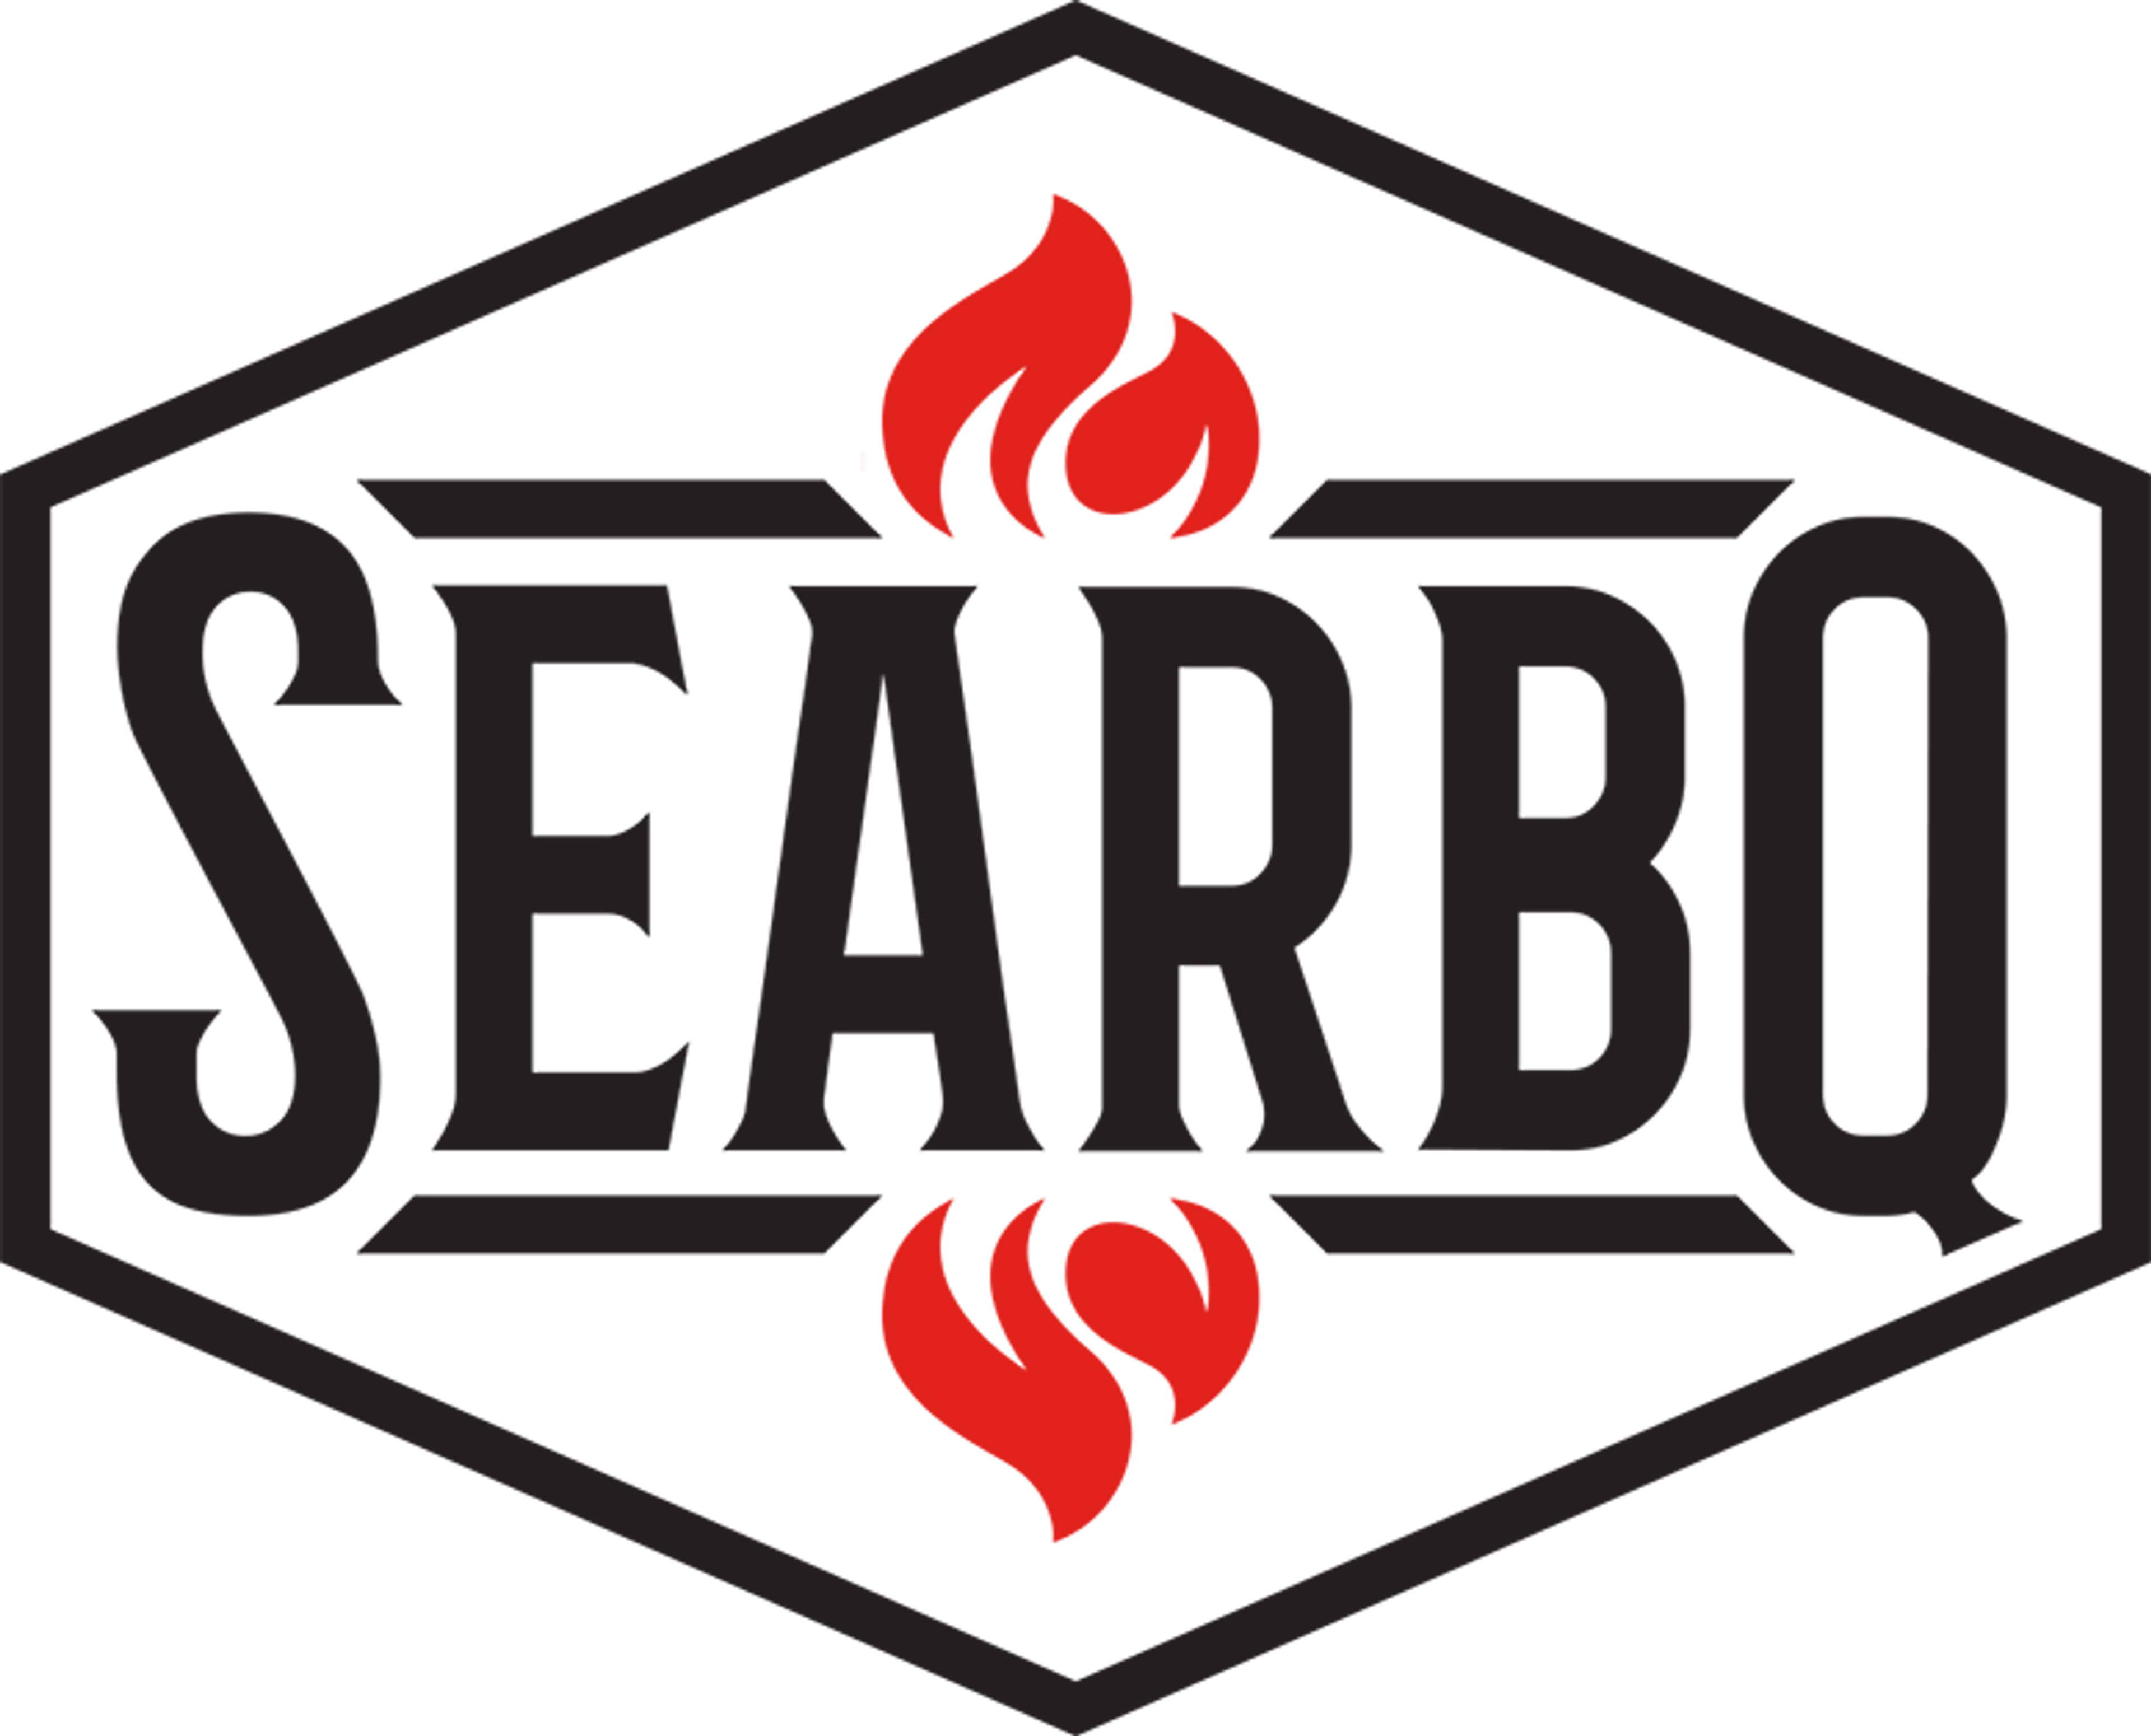 searbq